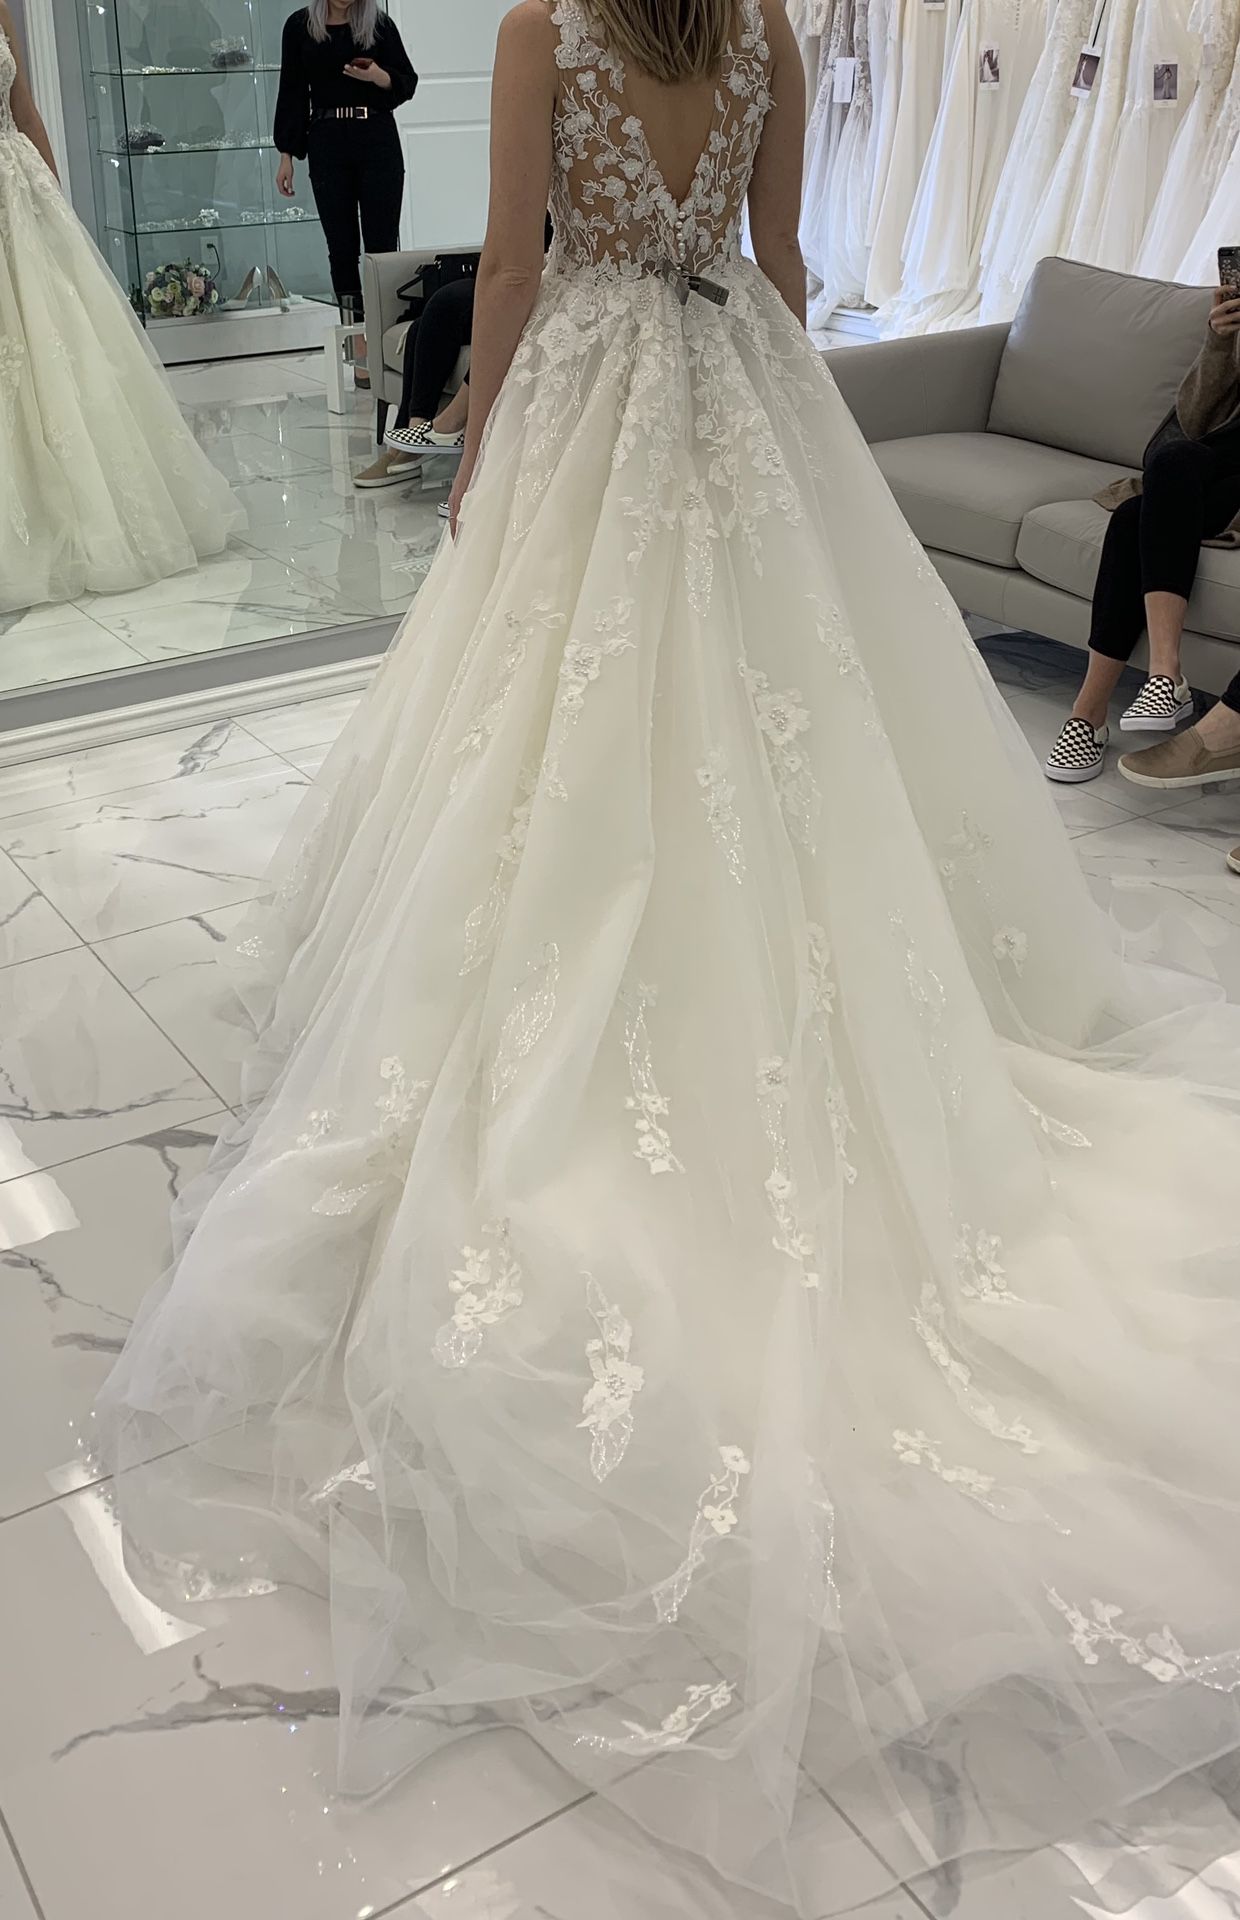 New. Wedding dress. Size 0. for Sale in Federal Way, WA - OfferUp